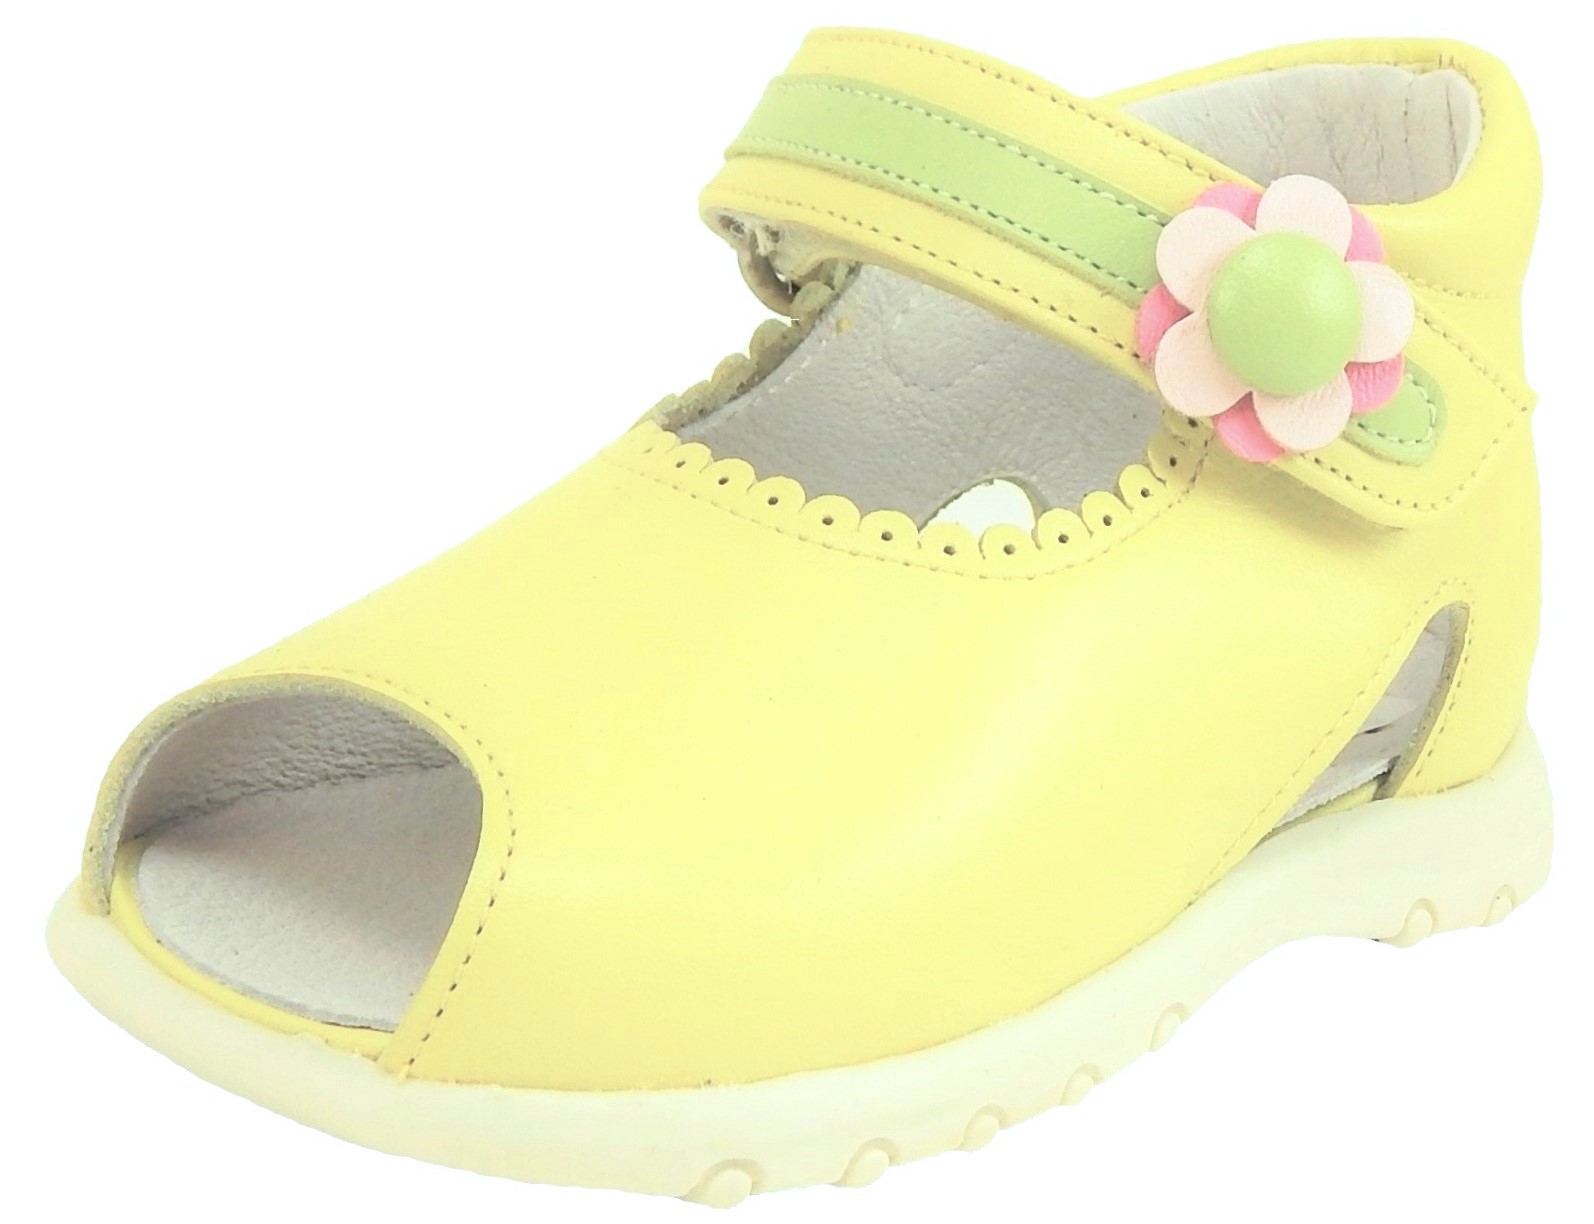 K-1054 - Chatreuse Yellow Sandals - Euro 19 Size 4